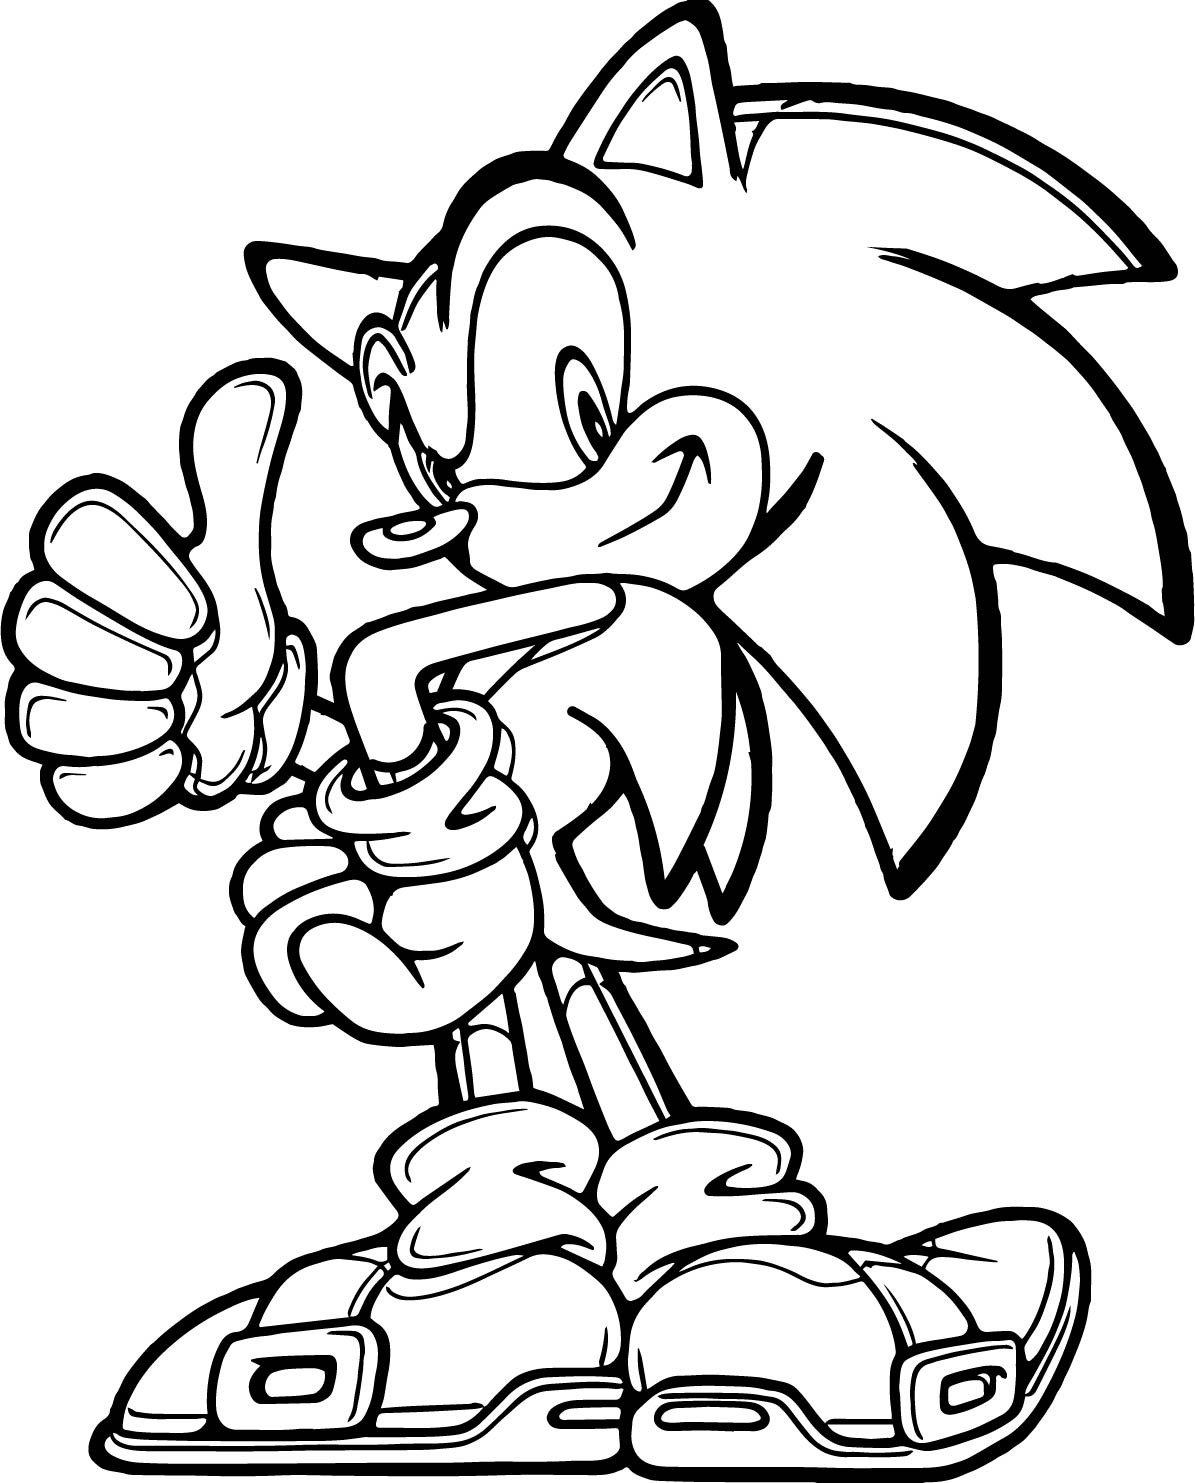 Sonic The Hedgehog Coloring Pages
 sonic the hedgehog coloring pages